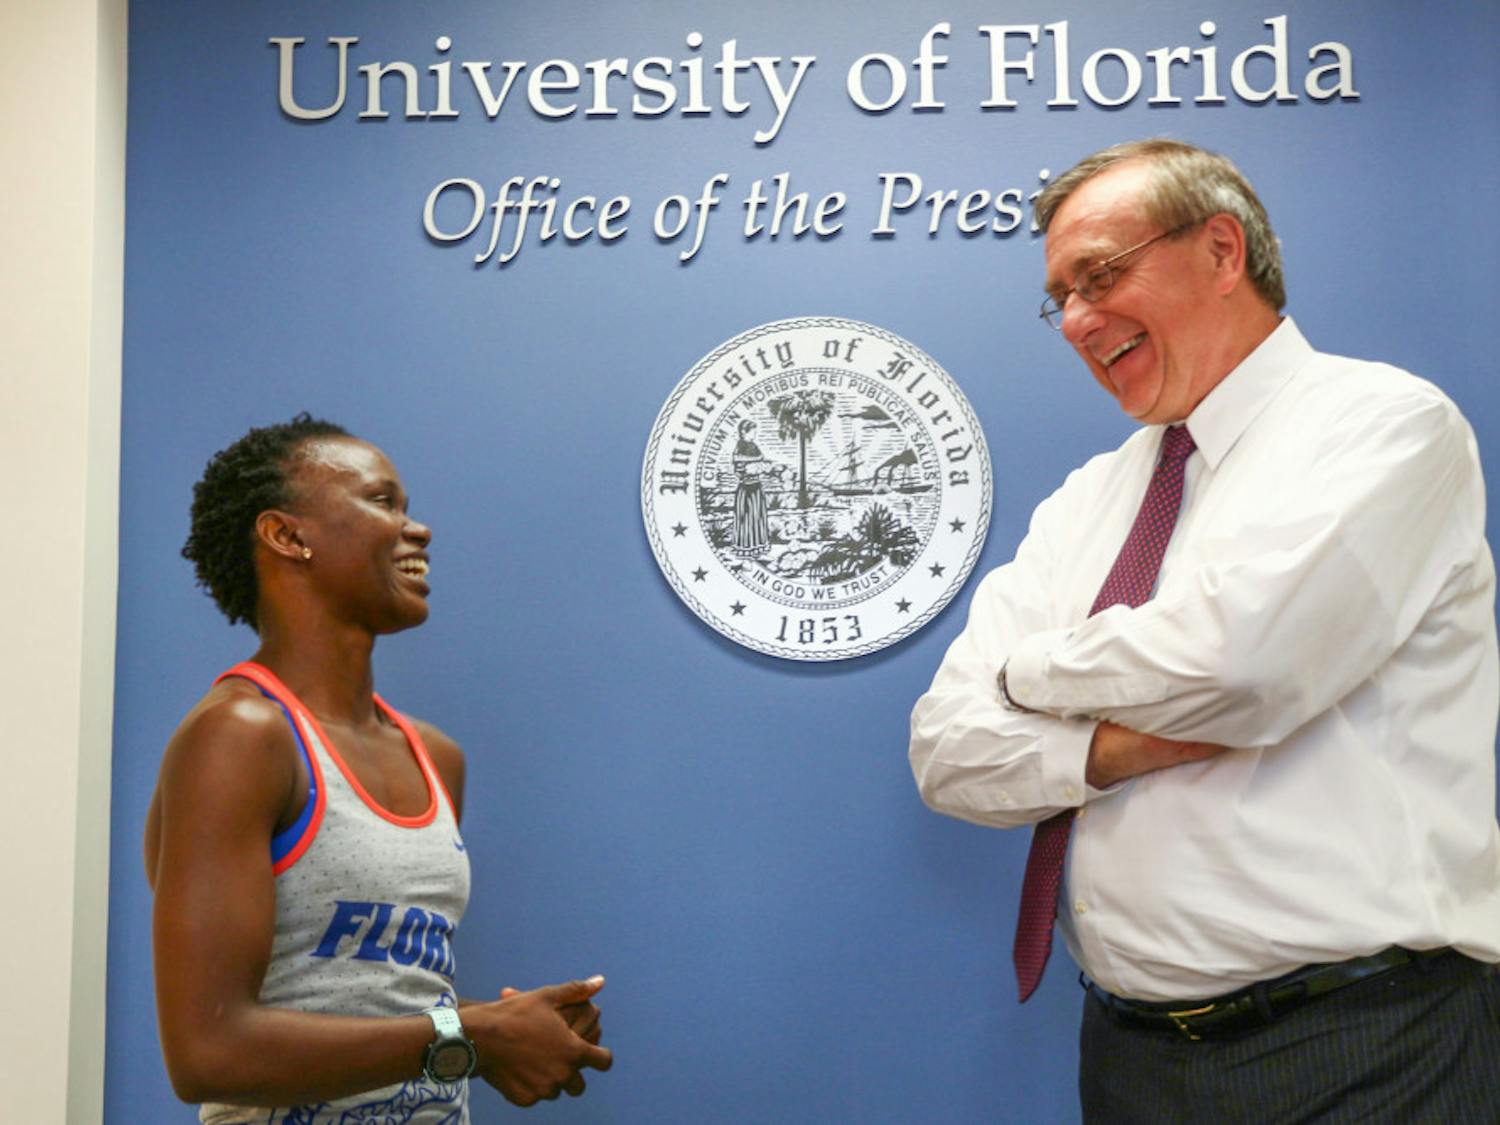 Nelly Kadag, a 30-year-old UF interdisciplinary ecology doctoral student, talks with UF President Kent Fuchs on Wednesday before completing the 22 Pushup Challenge, which educates people about veteran suicide rates. She nominated him for the challenge on Sept. 9.